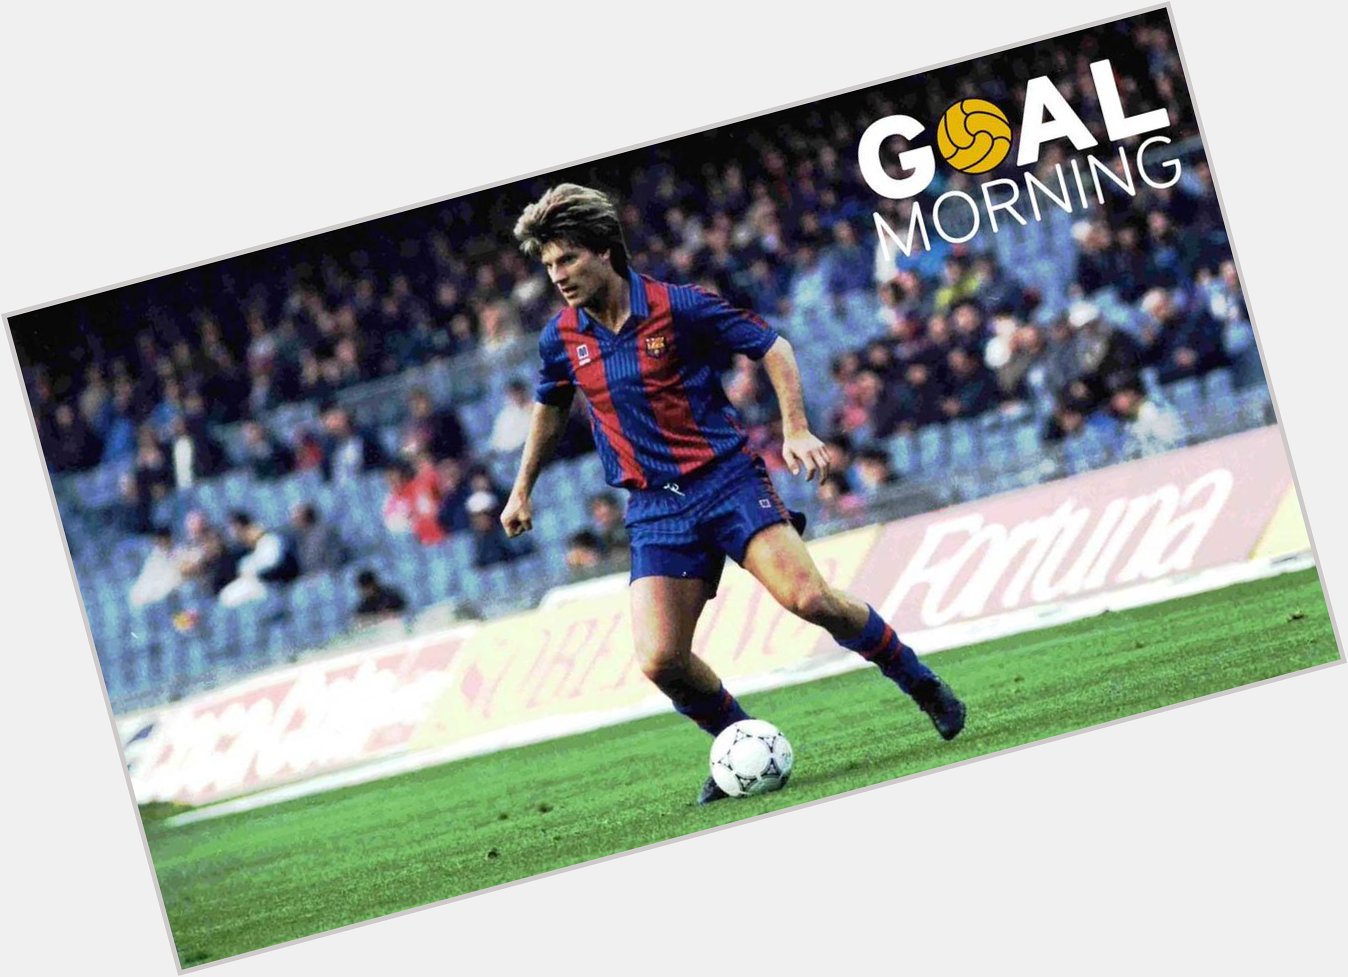 G  AL MORNING!!!   Today is Michael Laudrup s birthday. 
Happy birthday! 